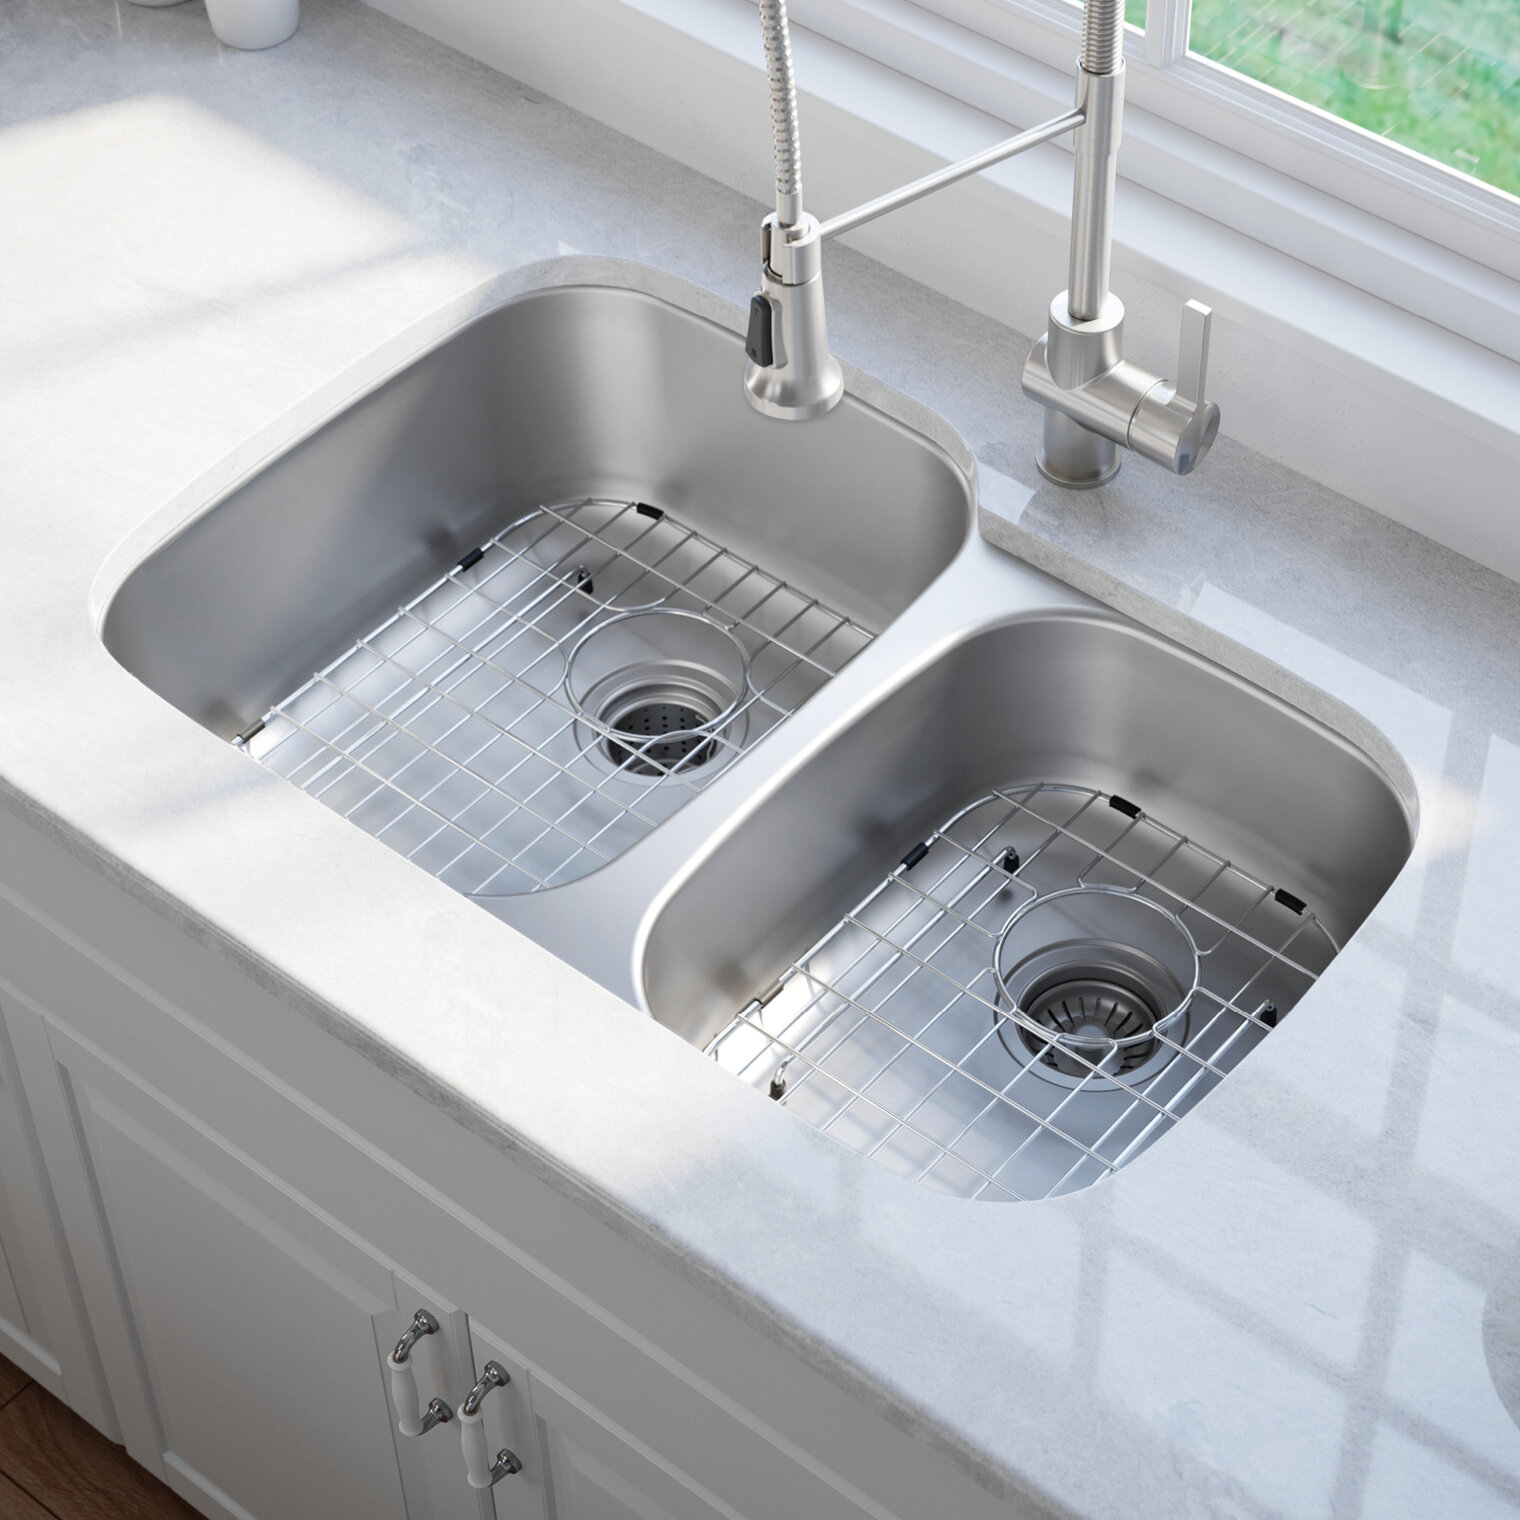 35 X 21 Double Basin Undermount Kitchen Sink With Noisedefend Soundproofing